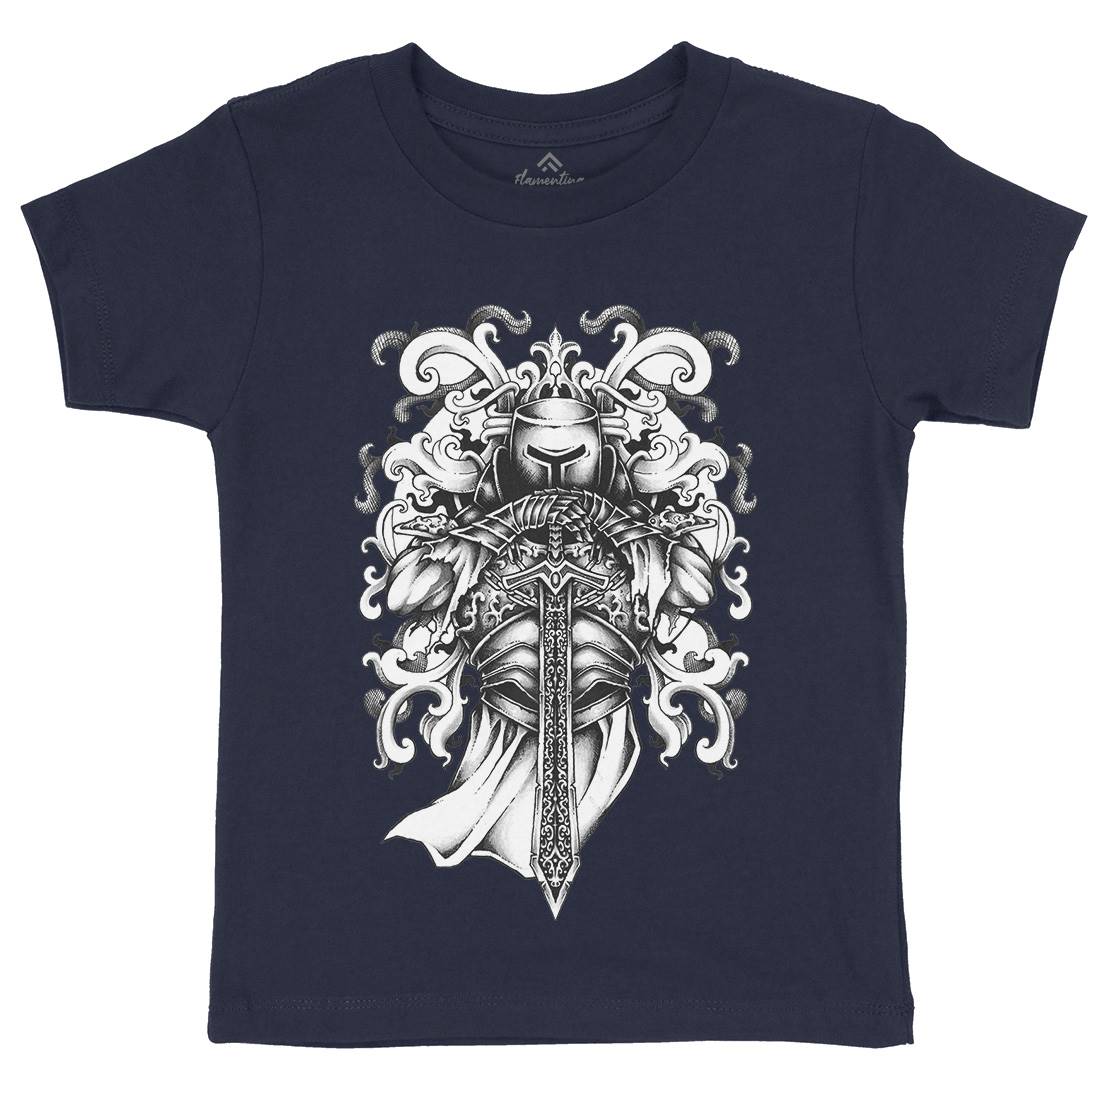 Knight And Armor Kids Crew Neck T-Shirt Warriors A431